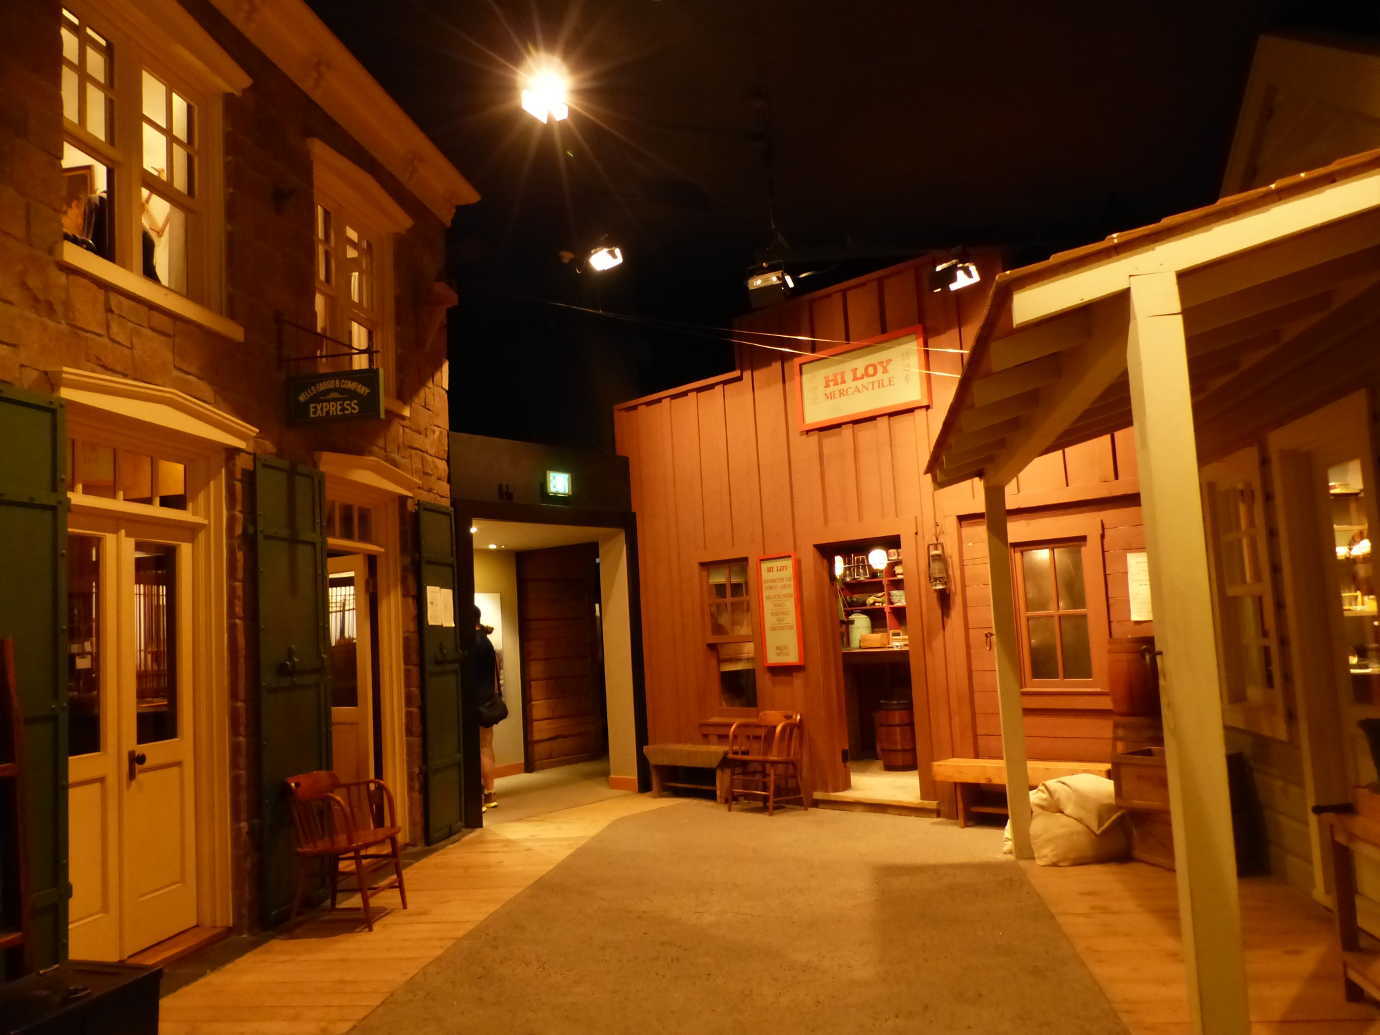 In the High Desert Museum’s early 1900s depiction of Silver City, Idaho, the presence of Chinese communities is front and center with the highly-immersive inclusion of Hi Loy mercantile. This store is modeled after the famous Kam Wah Chung store in eastern Oregon. Image courtesy of the High Desert Museum.